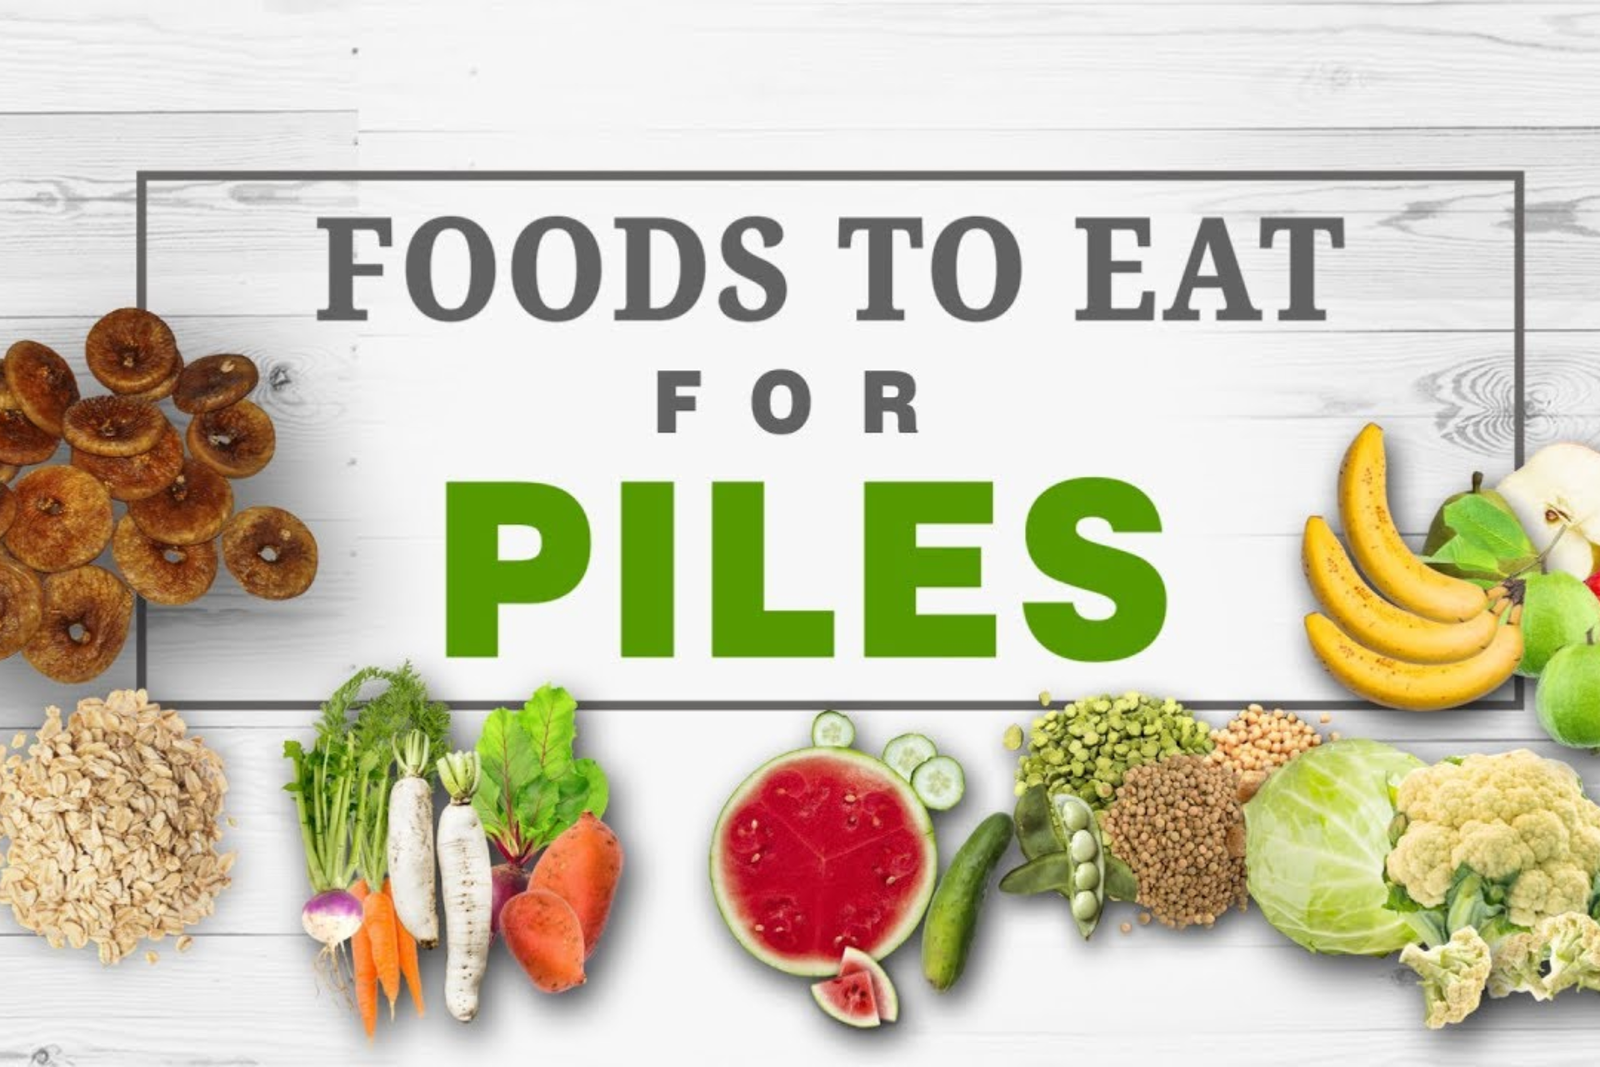 Diet One Must Follow for Piles Pain Relief